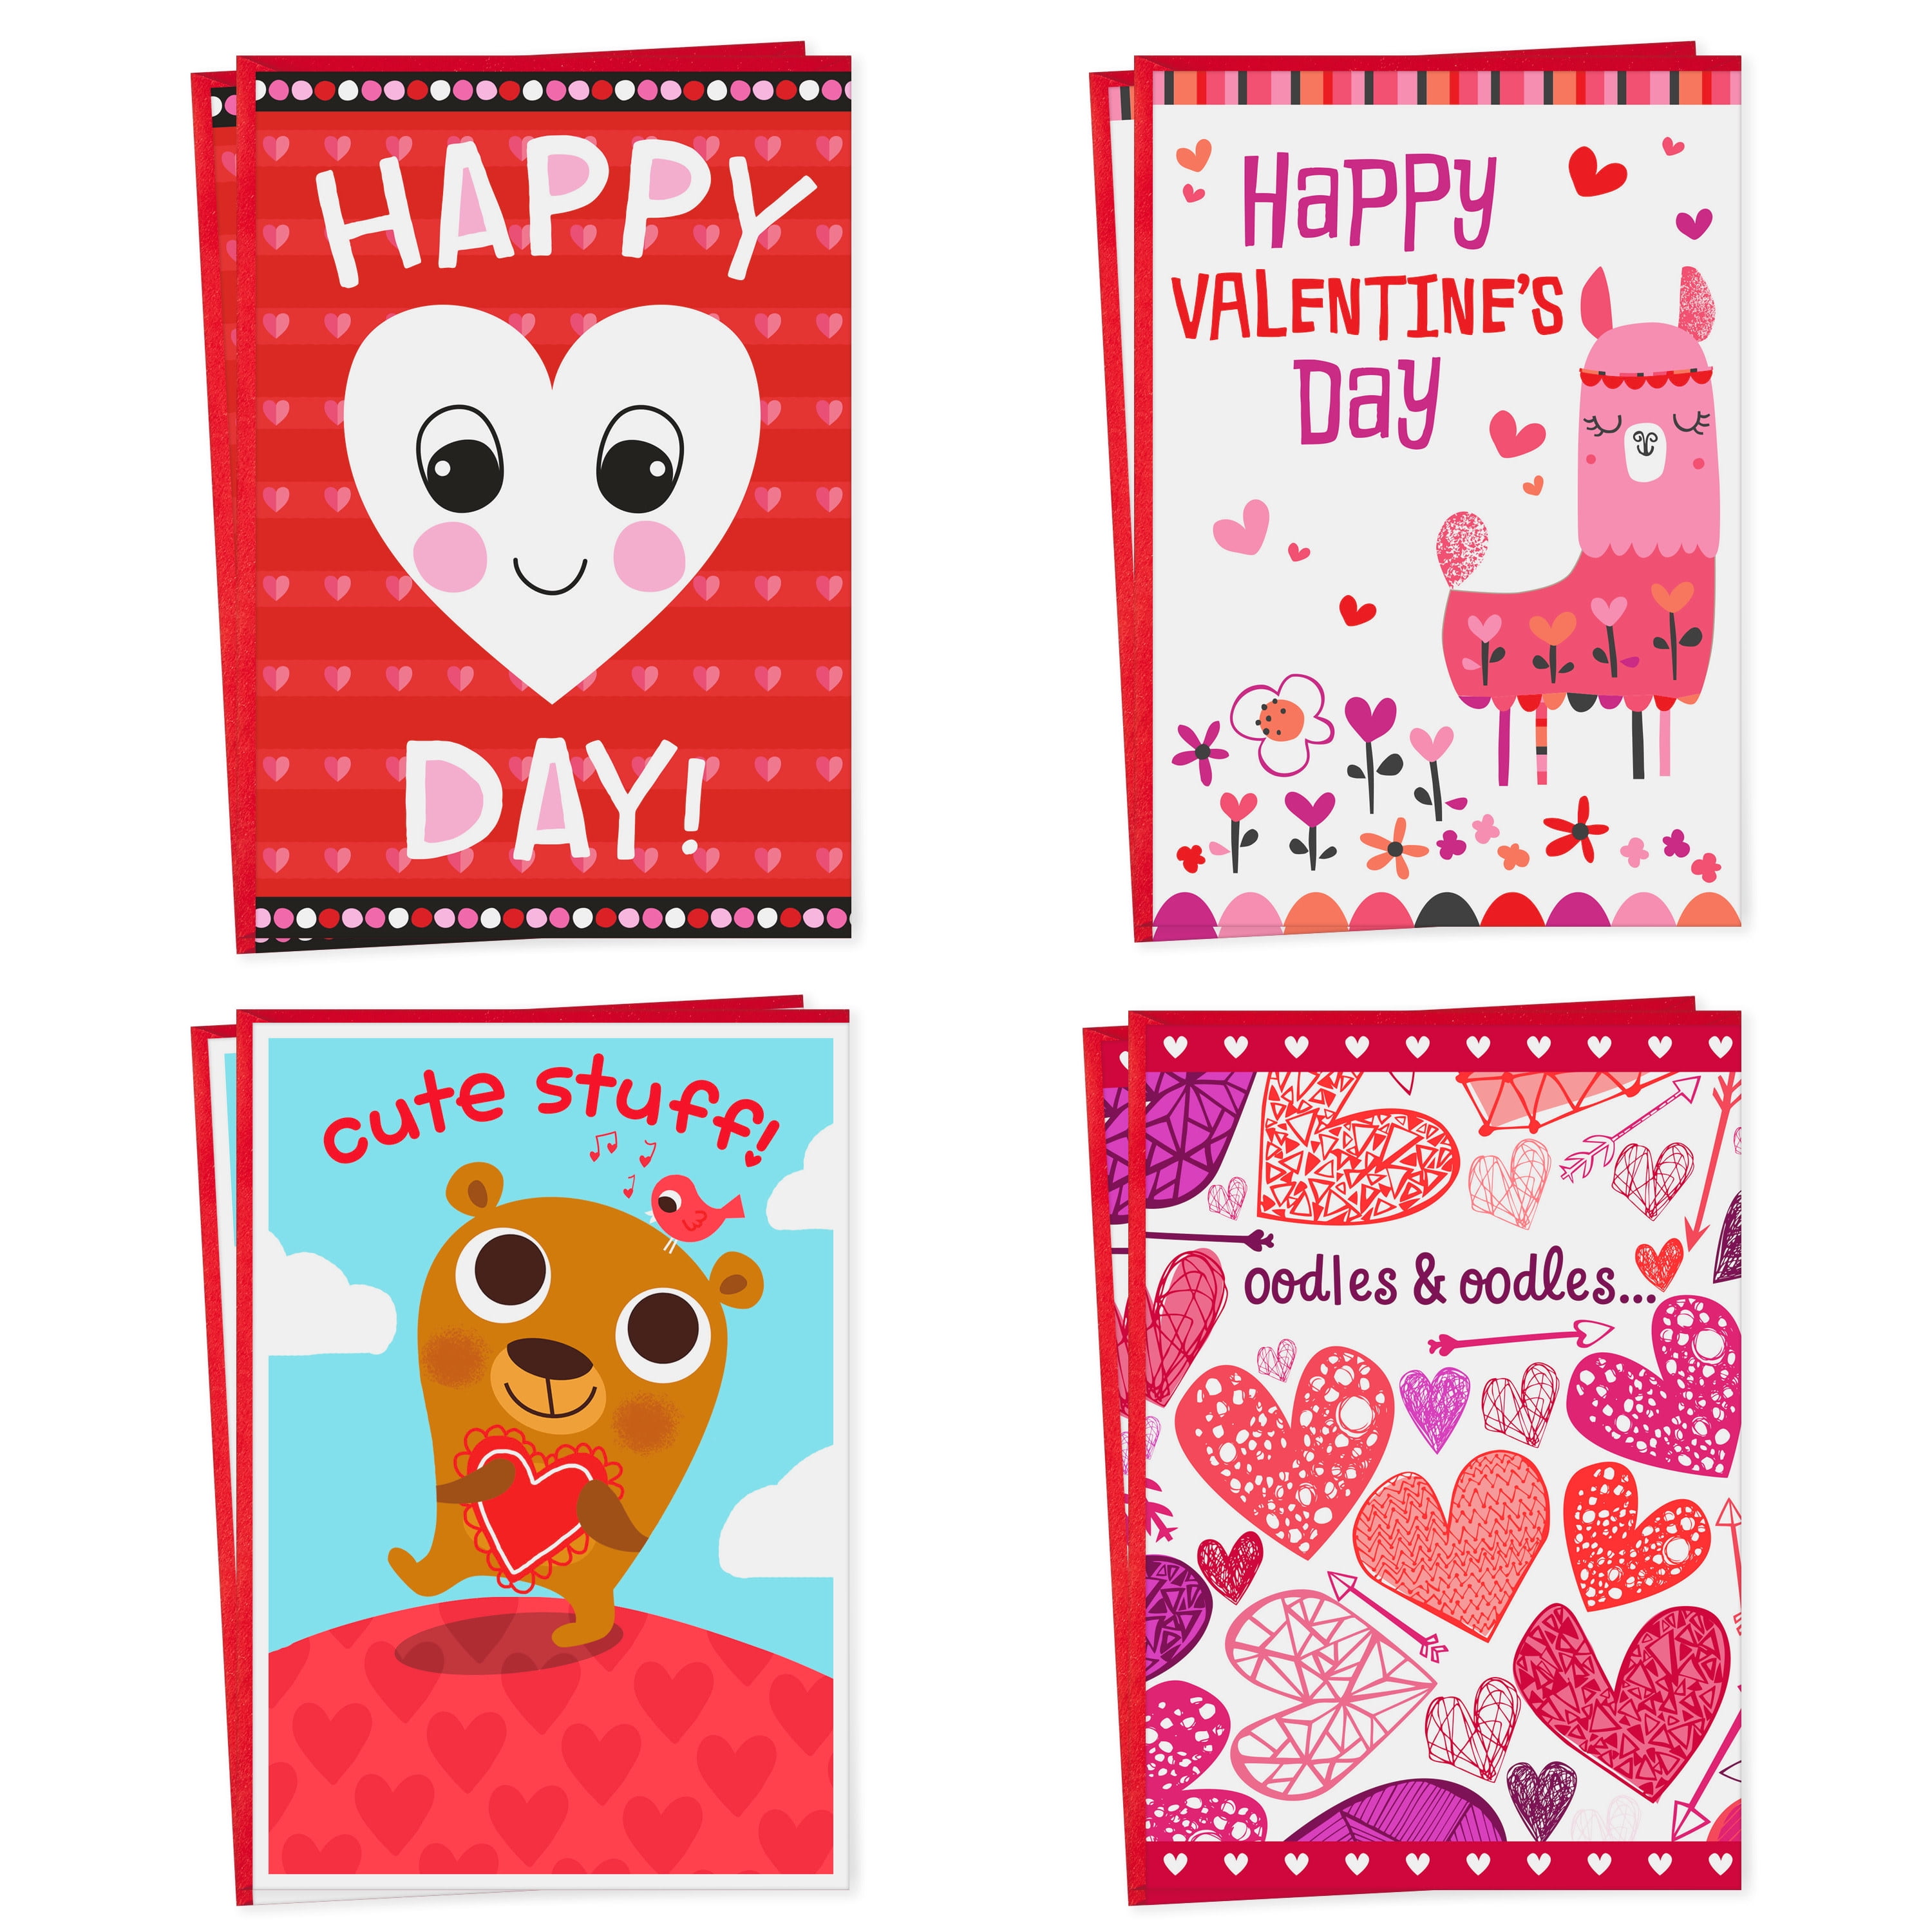  Hallmark Mini Valentines Day Cards Assortment, 18 Cards with  Envelopes (Vintage, Be My Valentine) : Books